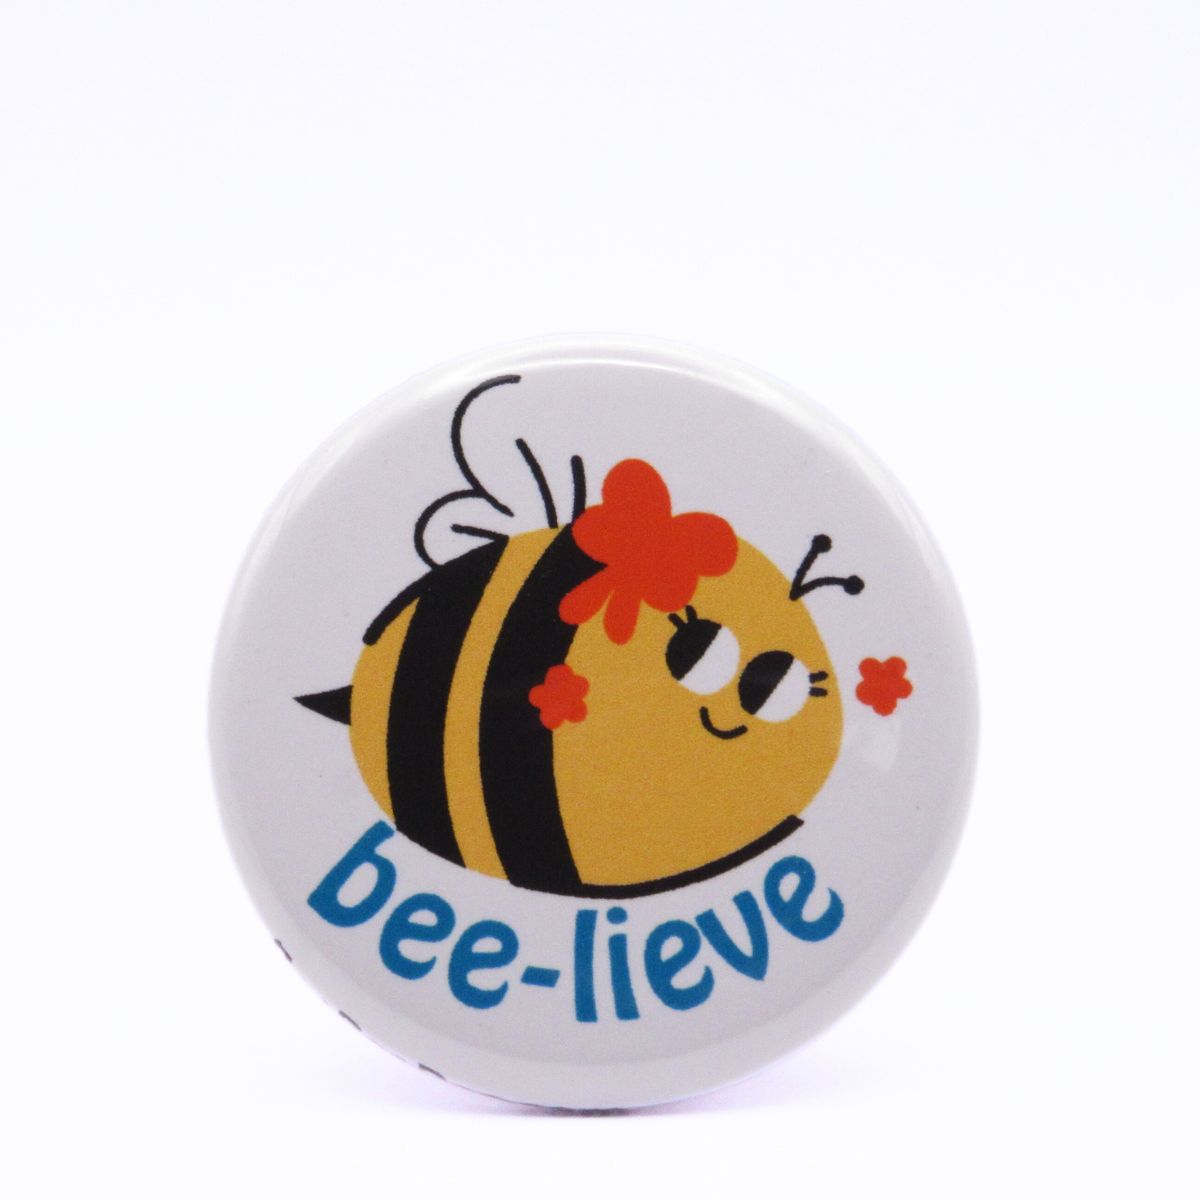 BooBooRoo Pinback Button (i.e. button, badge, pin) of a Cute Kawaii Style Bee with the pun Bee-lieve.